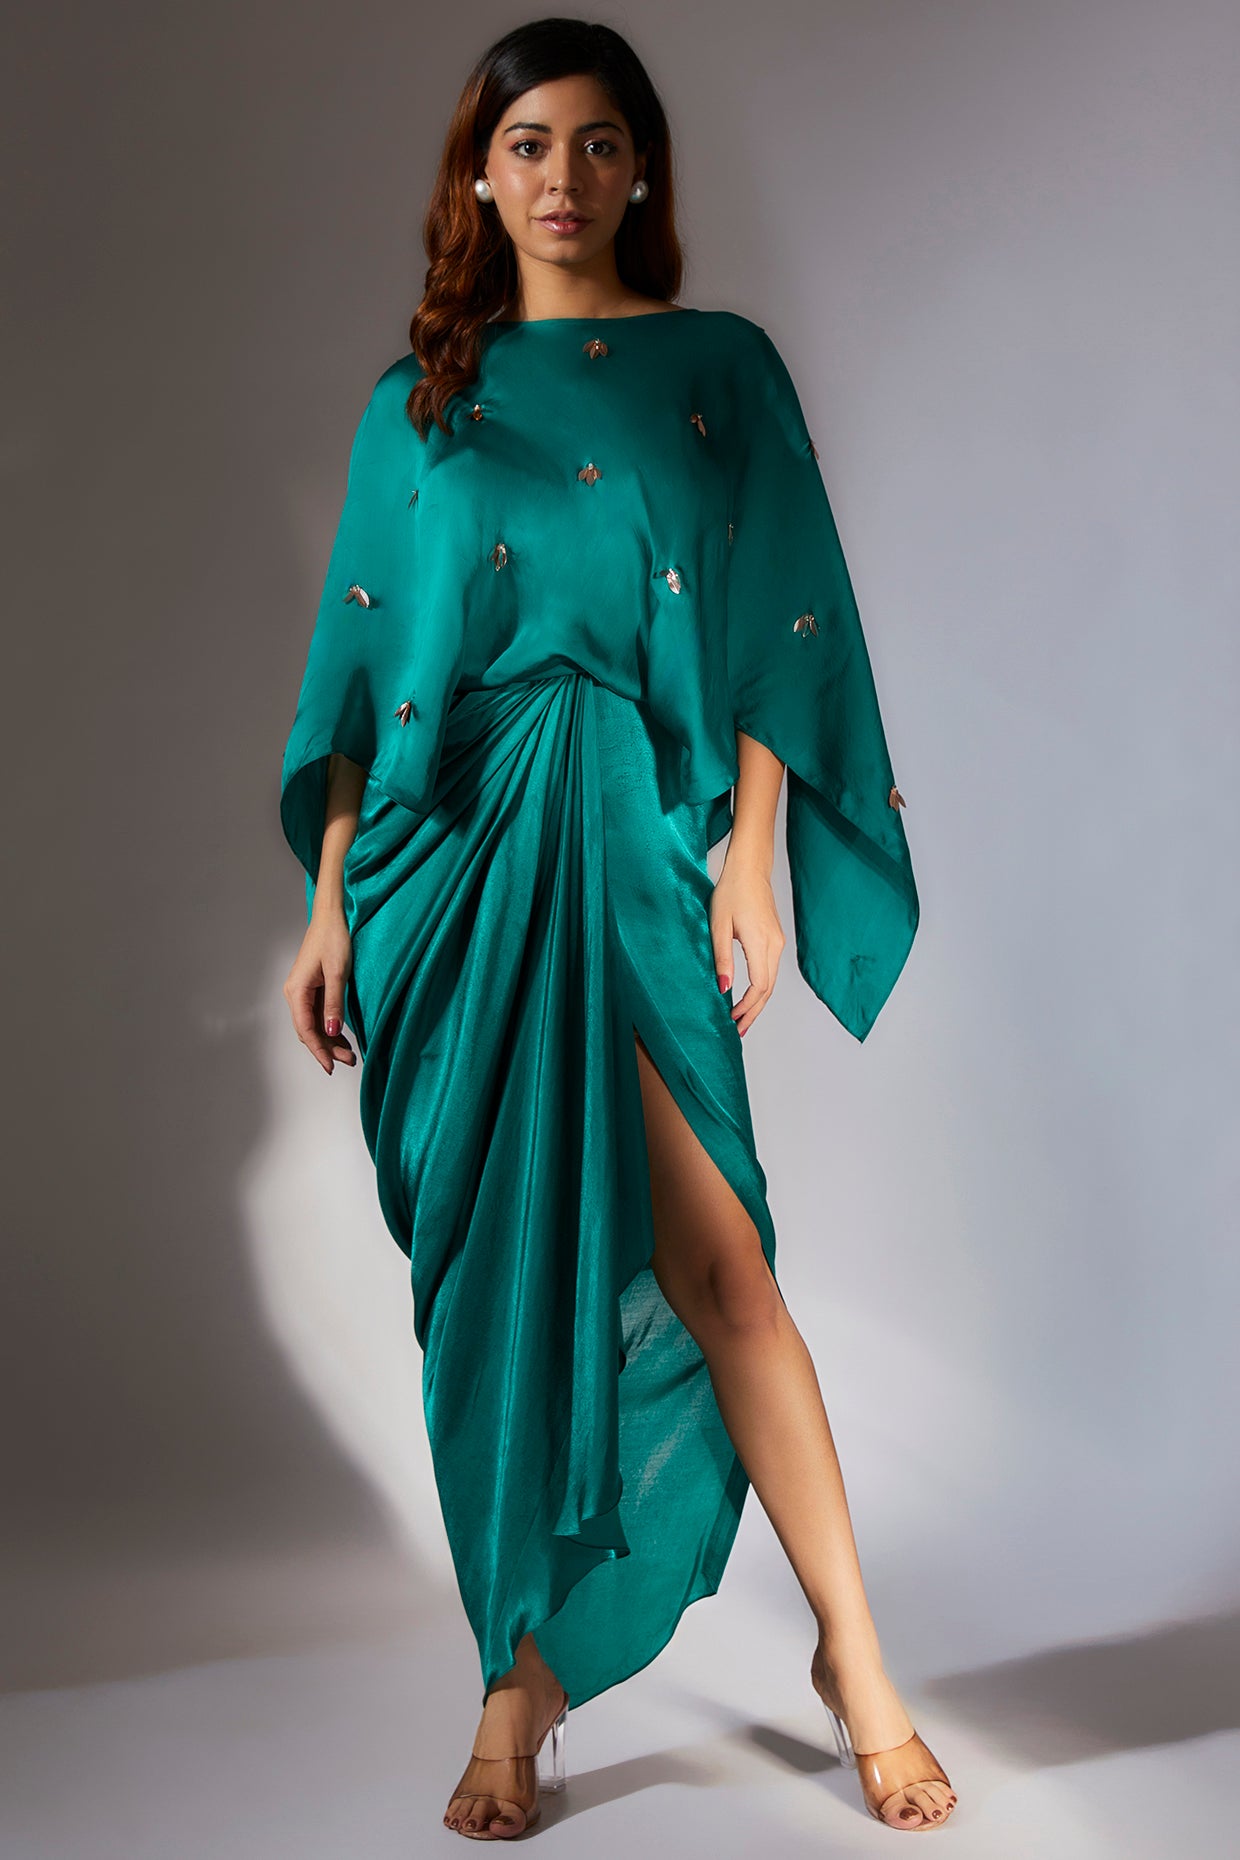 Teal Green Embroidered Drape Dress